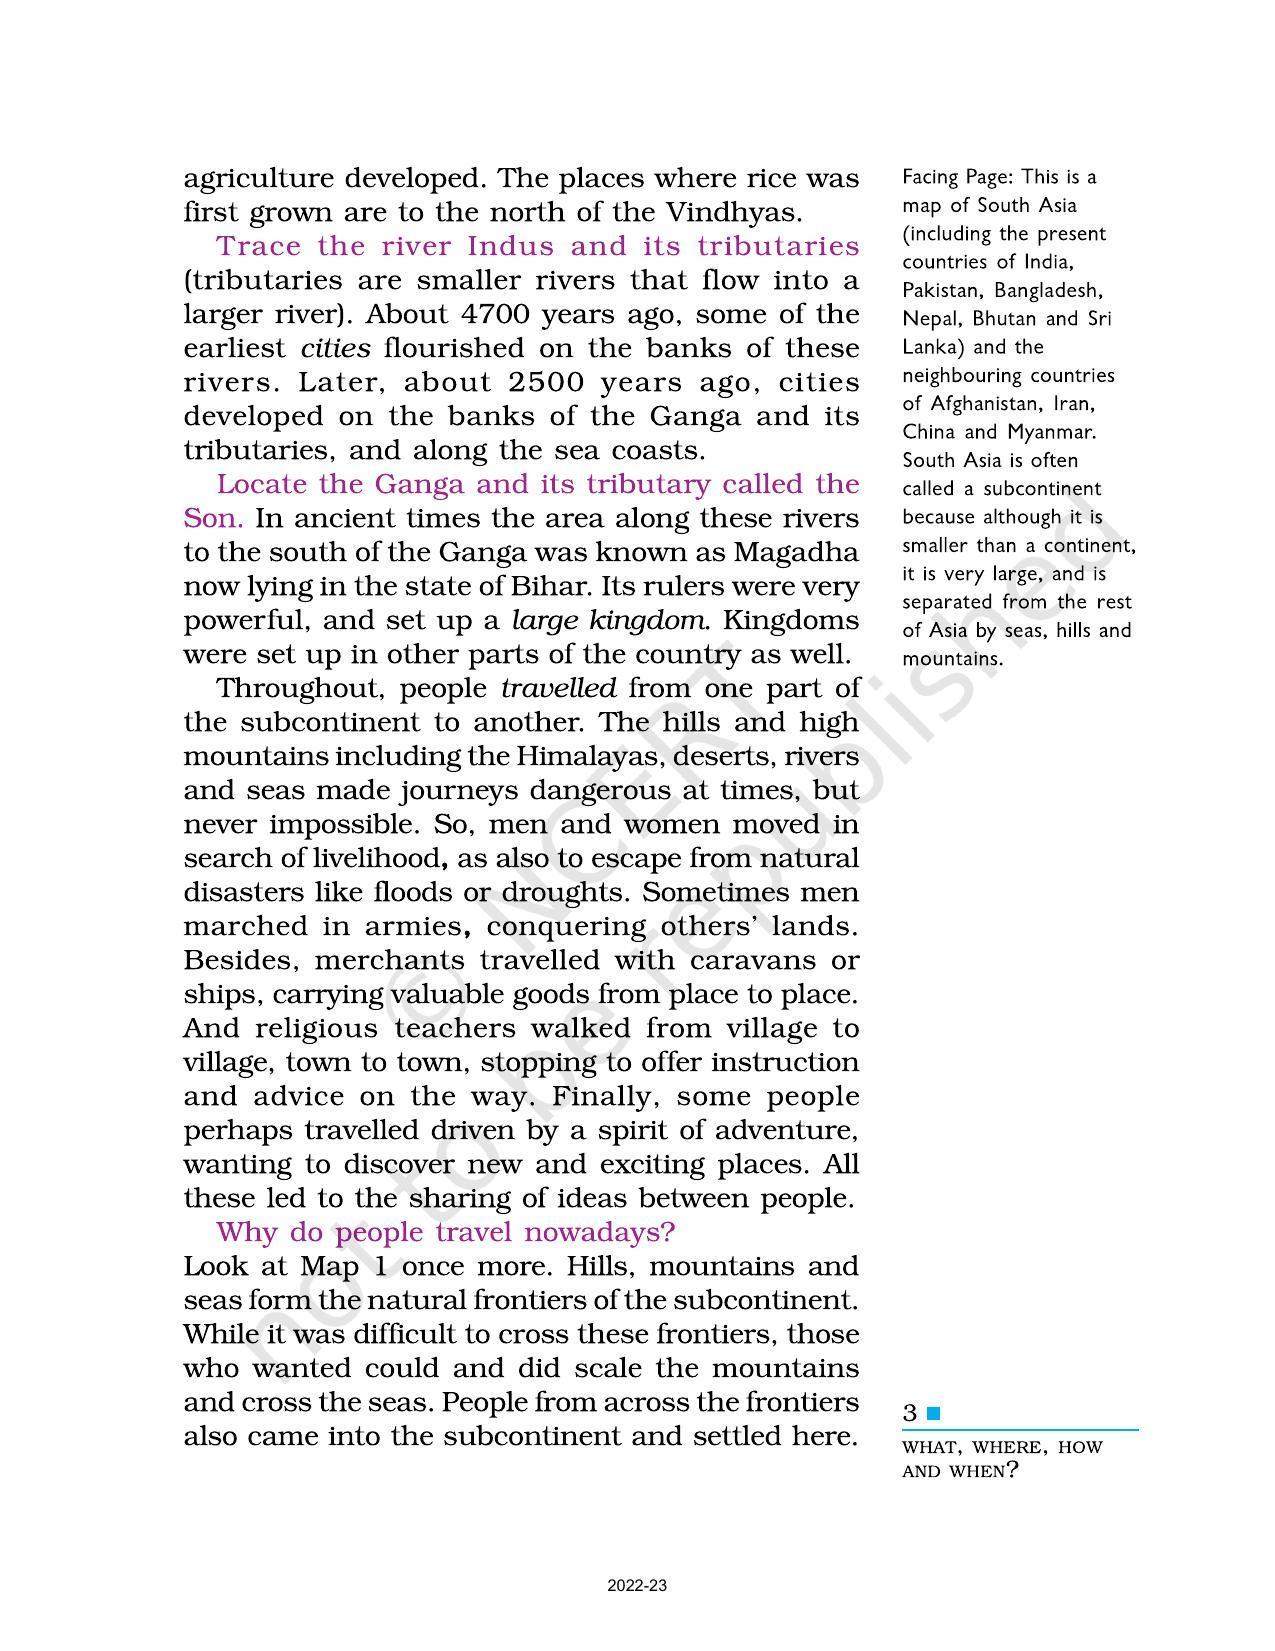 NCERT Book for Class 6 History (Social Science) : Chapter 1-What Where, How, and When? - Page 3